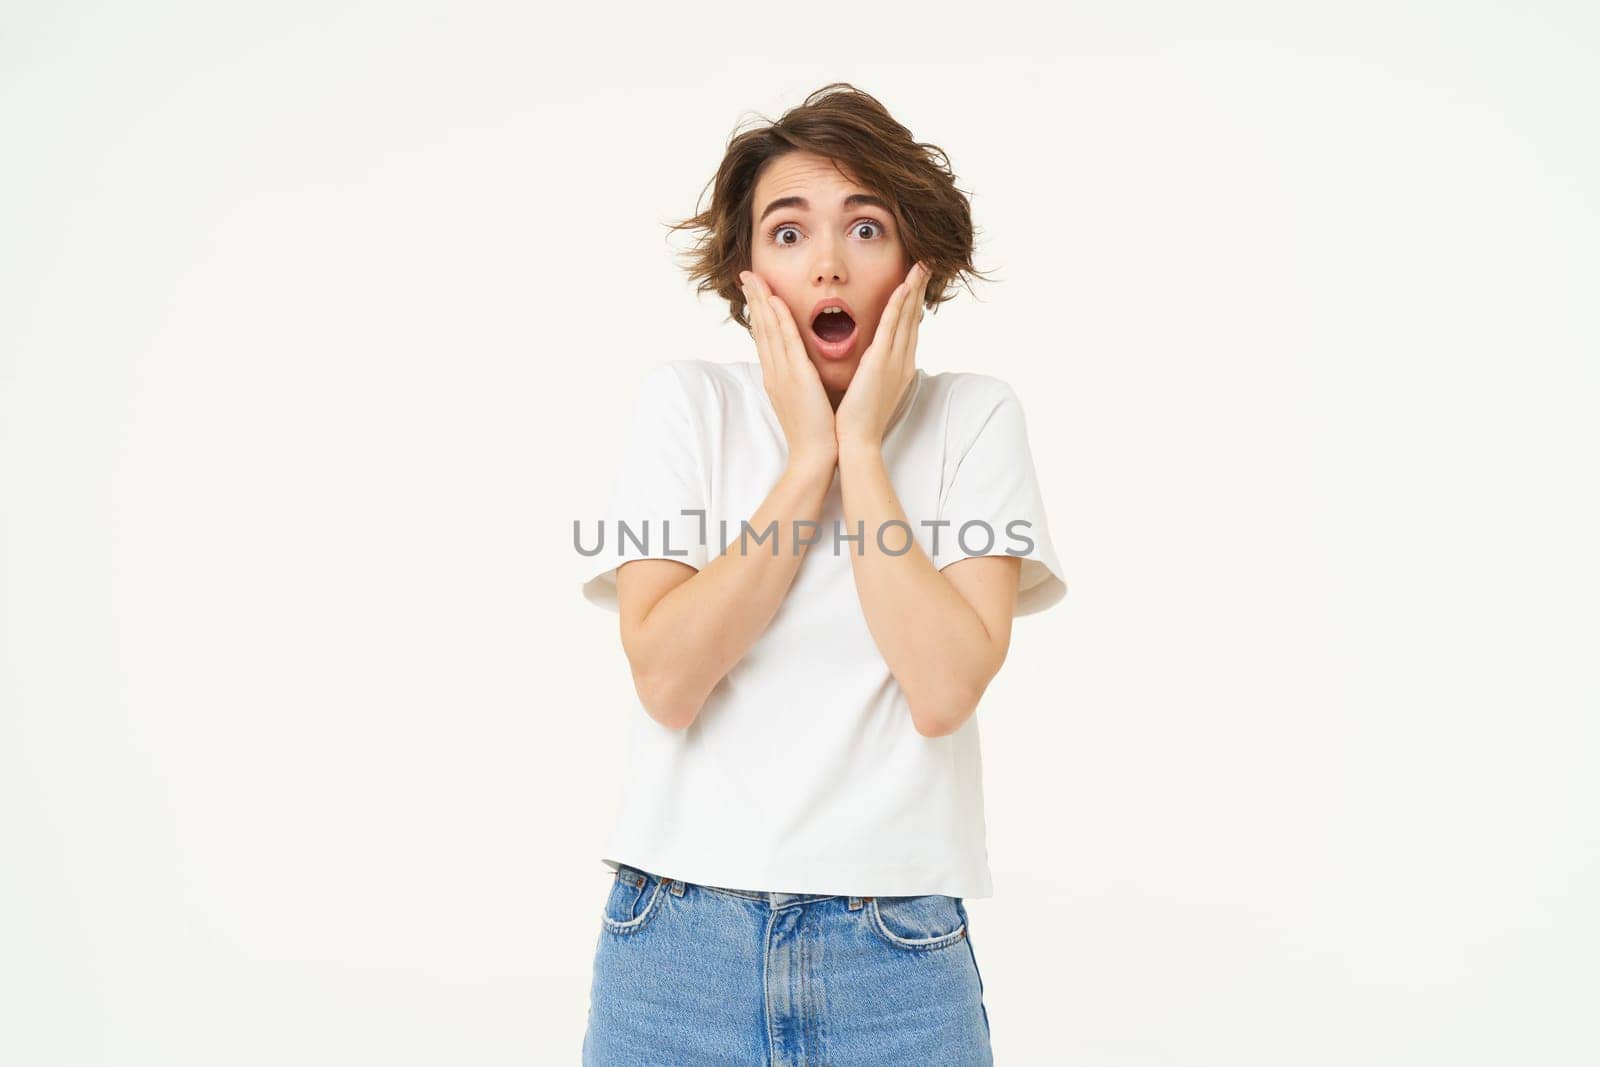 Portrait of girl with shocked, scared face, screams, holds hands on cheeks, stands over white studio background.